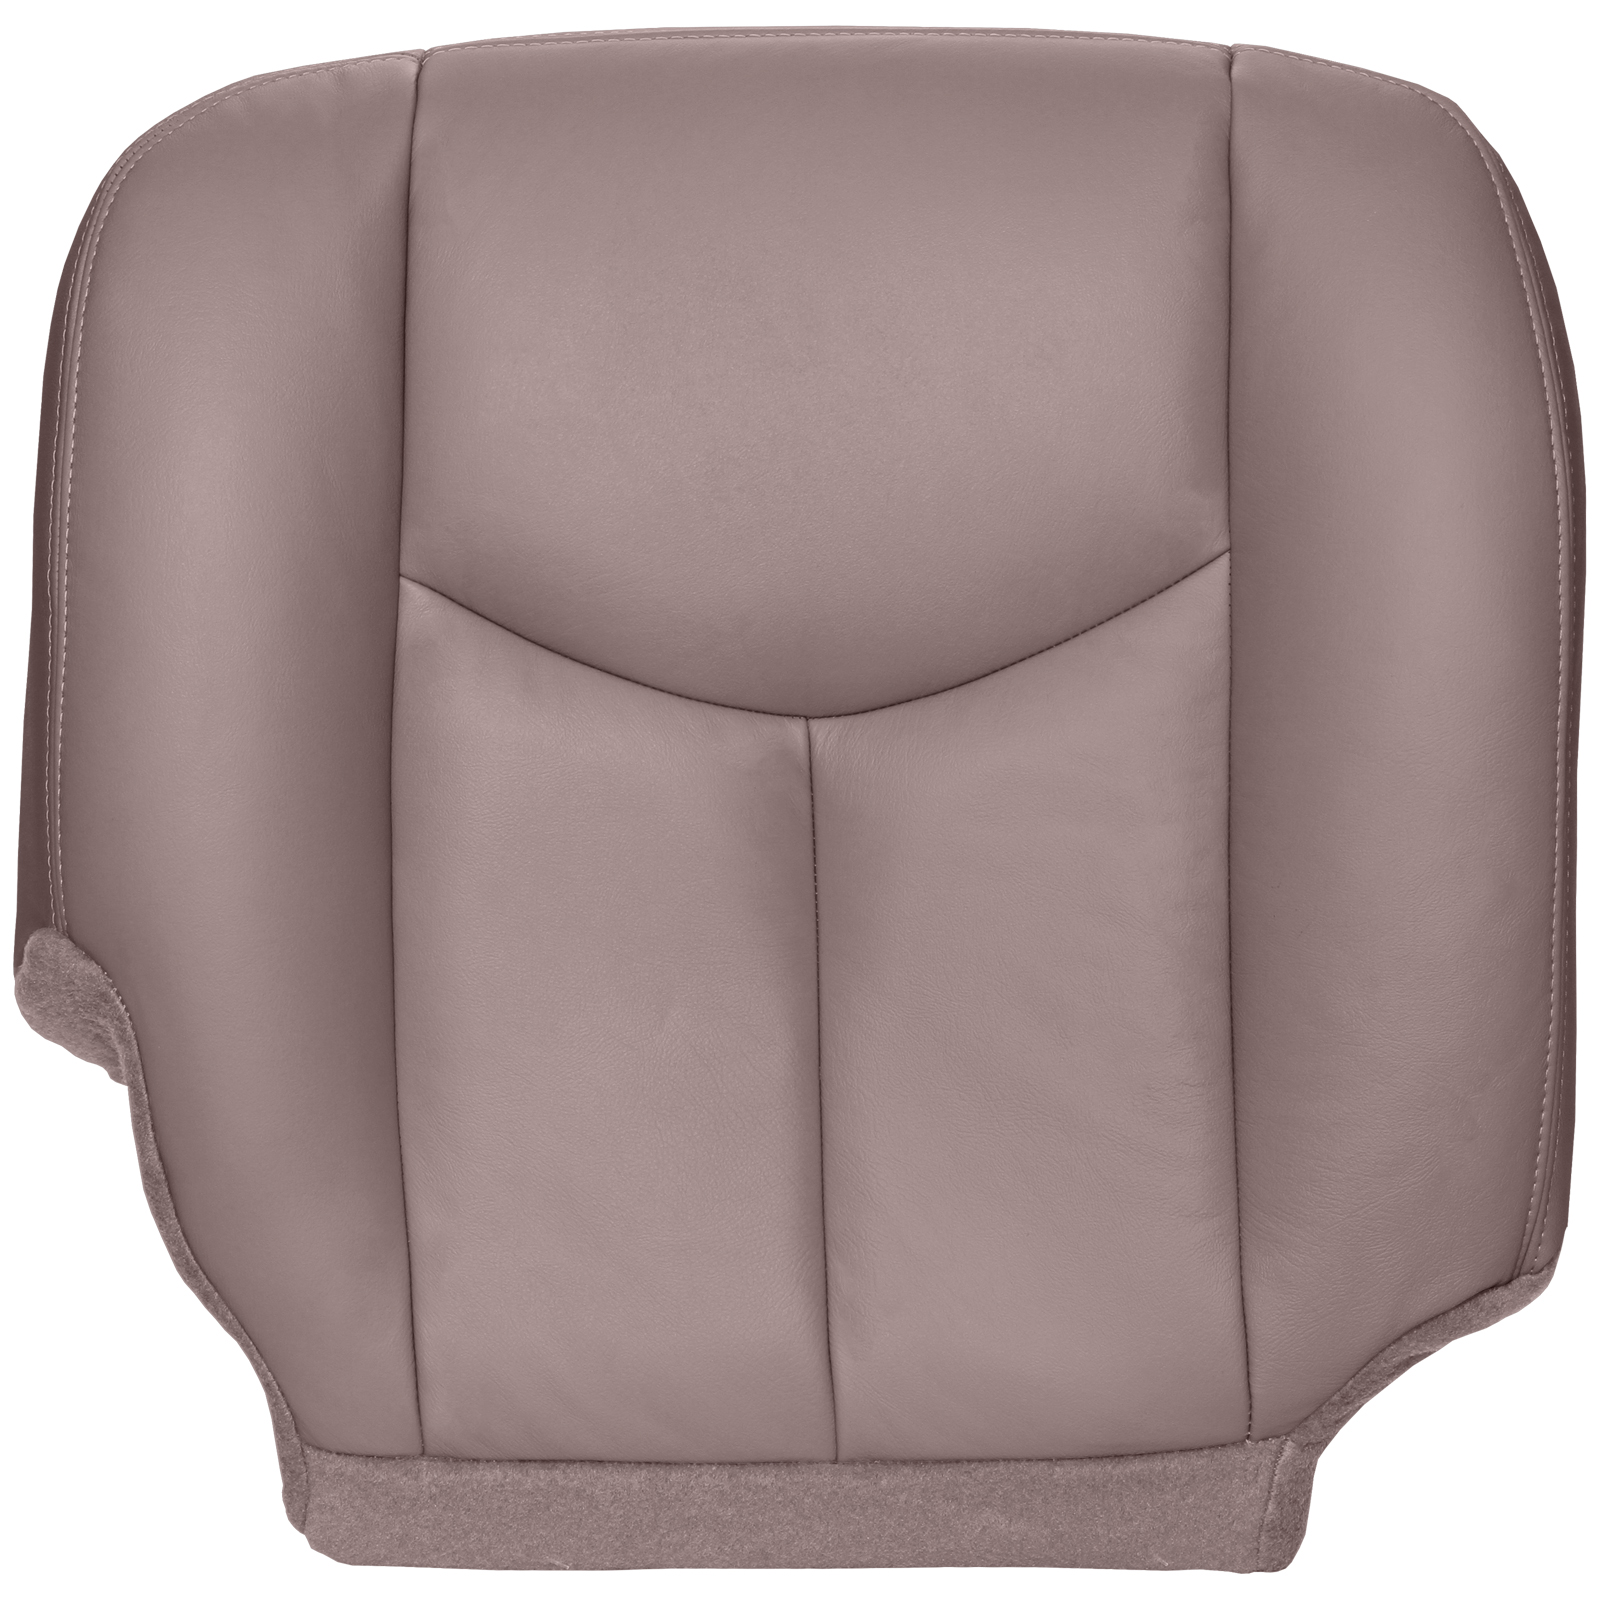 The Seat Shop Silverado Passenger Bottom OEM Fit Leather Seat Cover, Tan - image 1 of 2